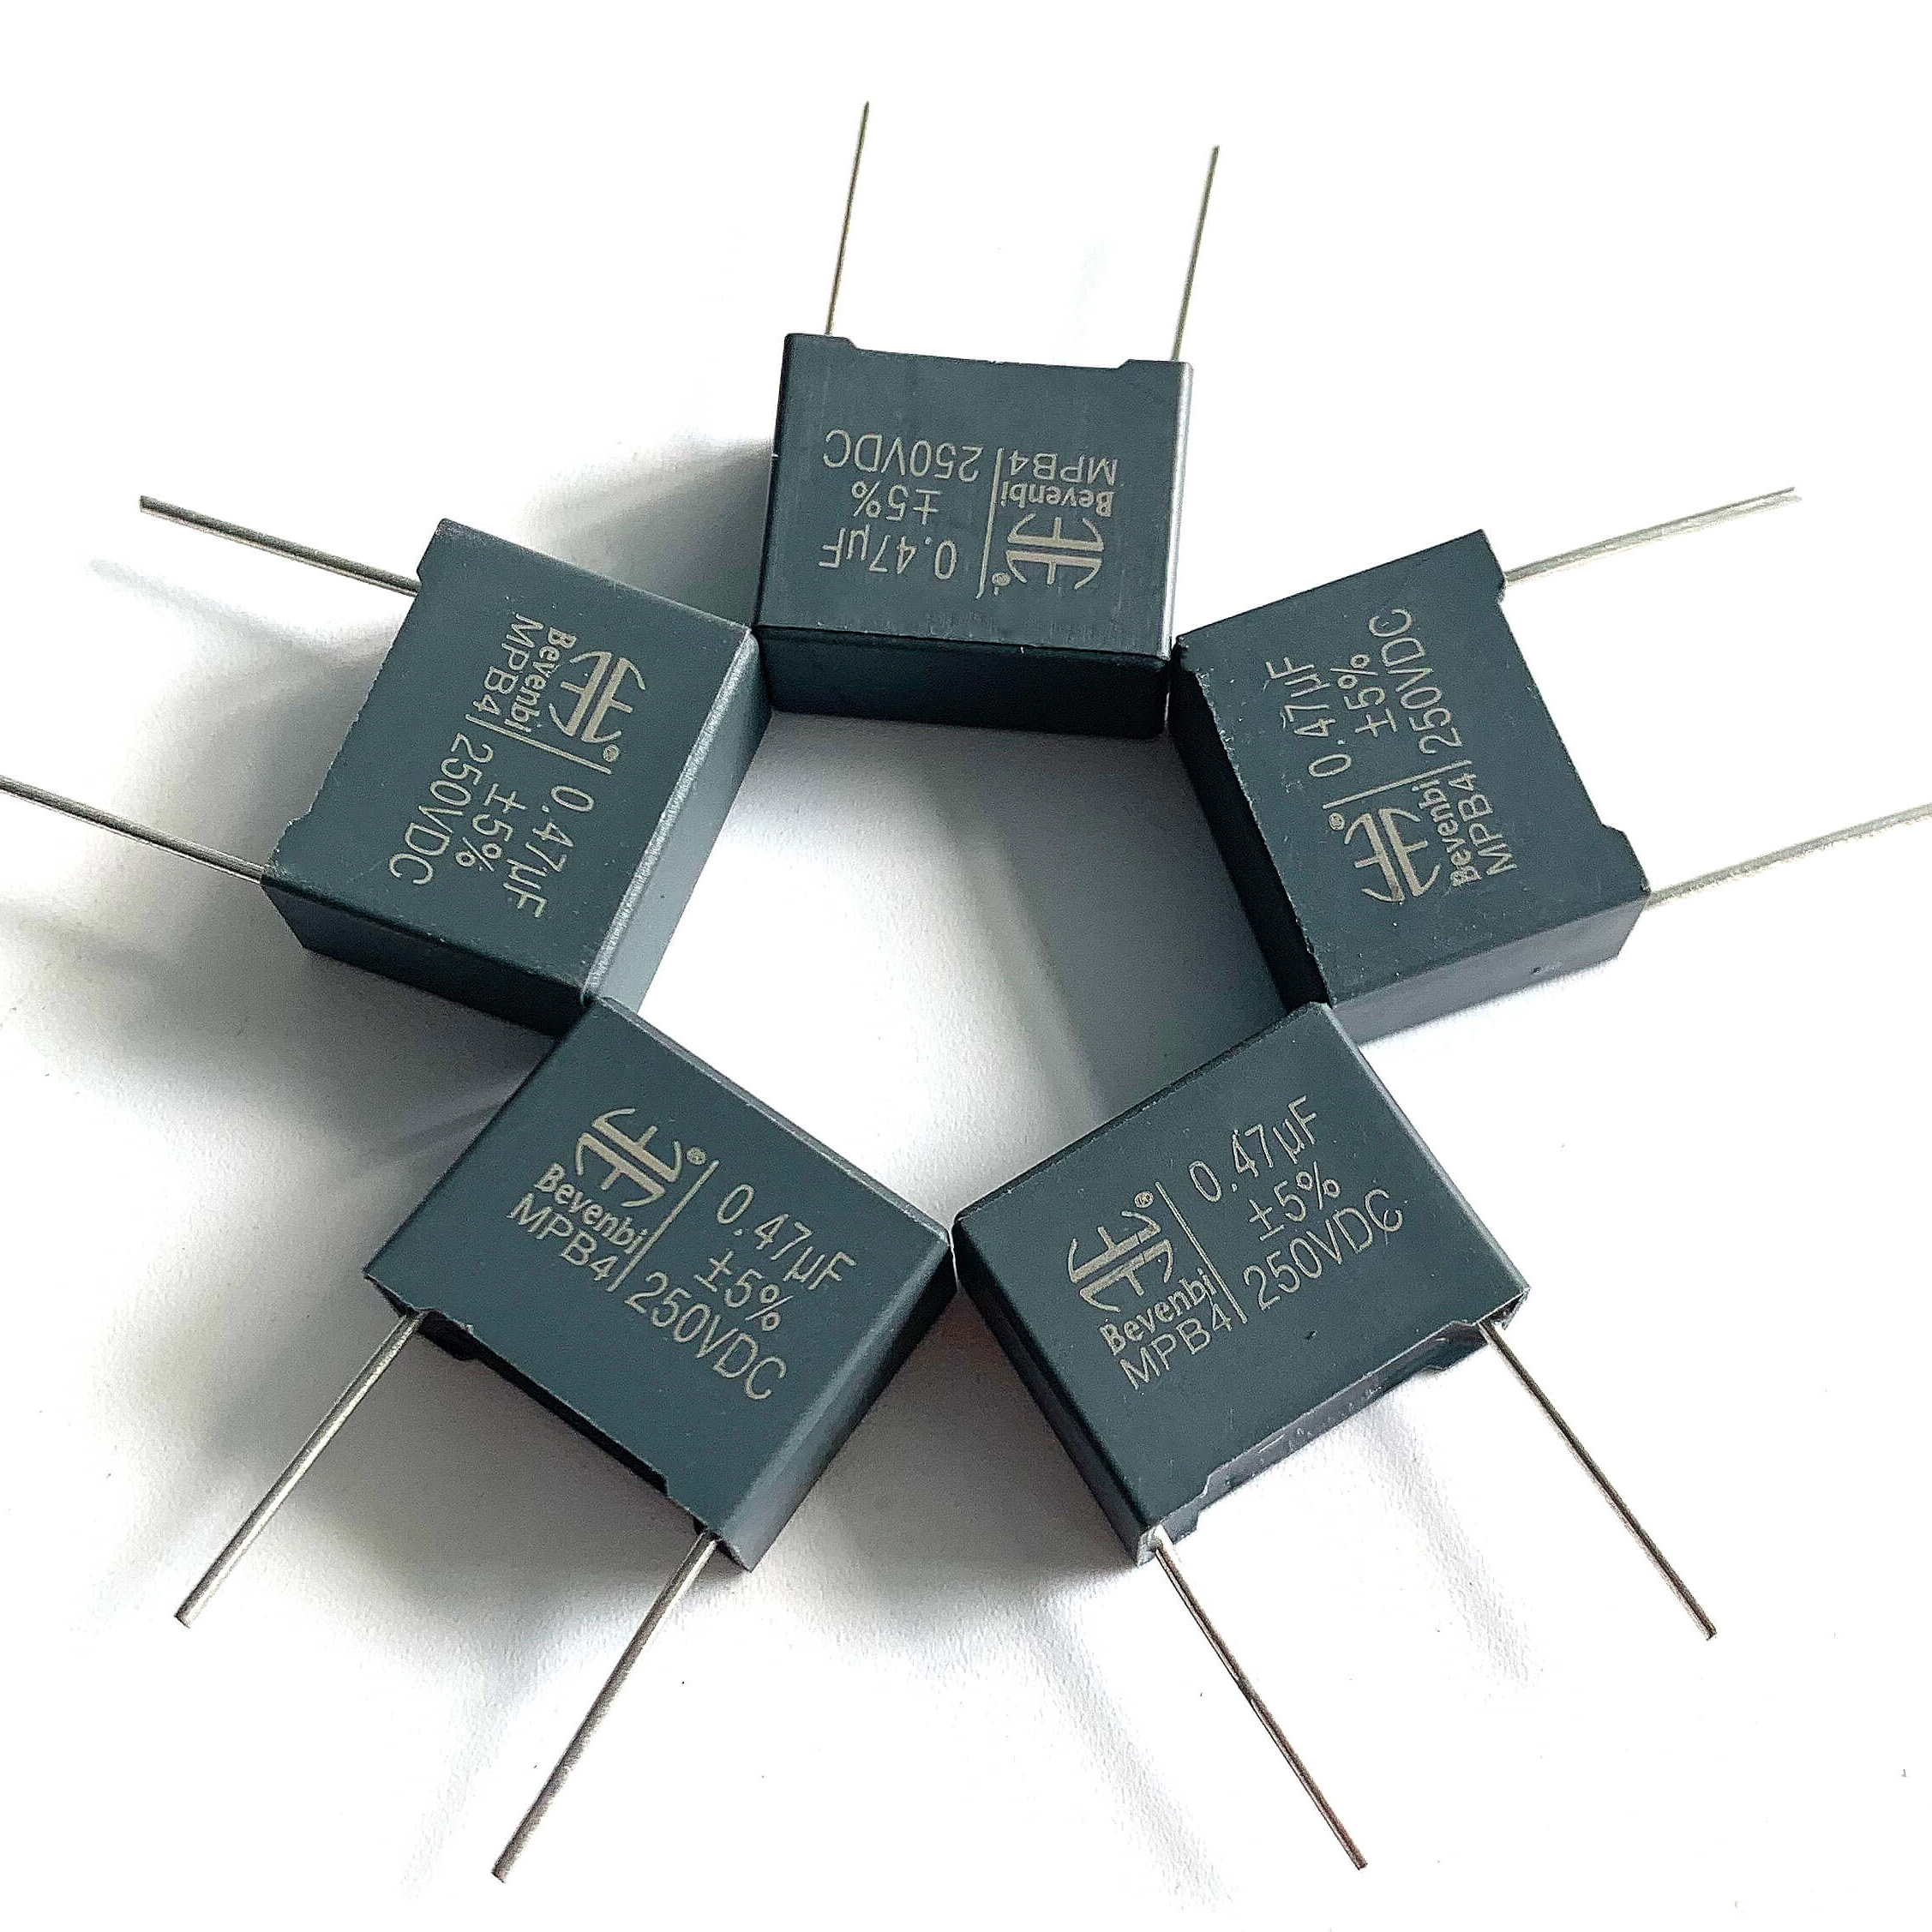 2019 High quality Dayton Axial-Metallized Polypropylene Film Capacitor -
 CL23(MEB) Box Metallized Polyester Film Capacitors – A Friend